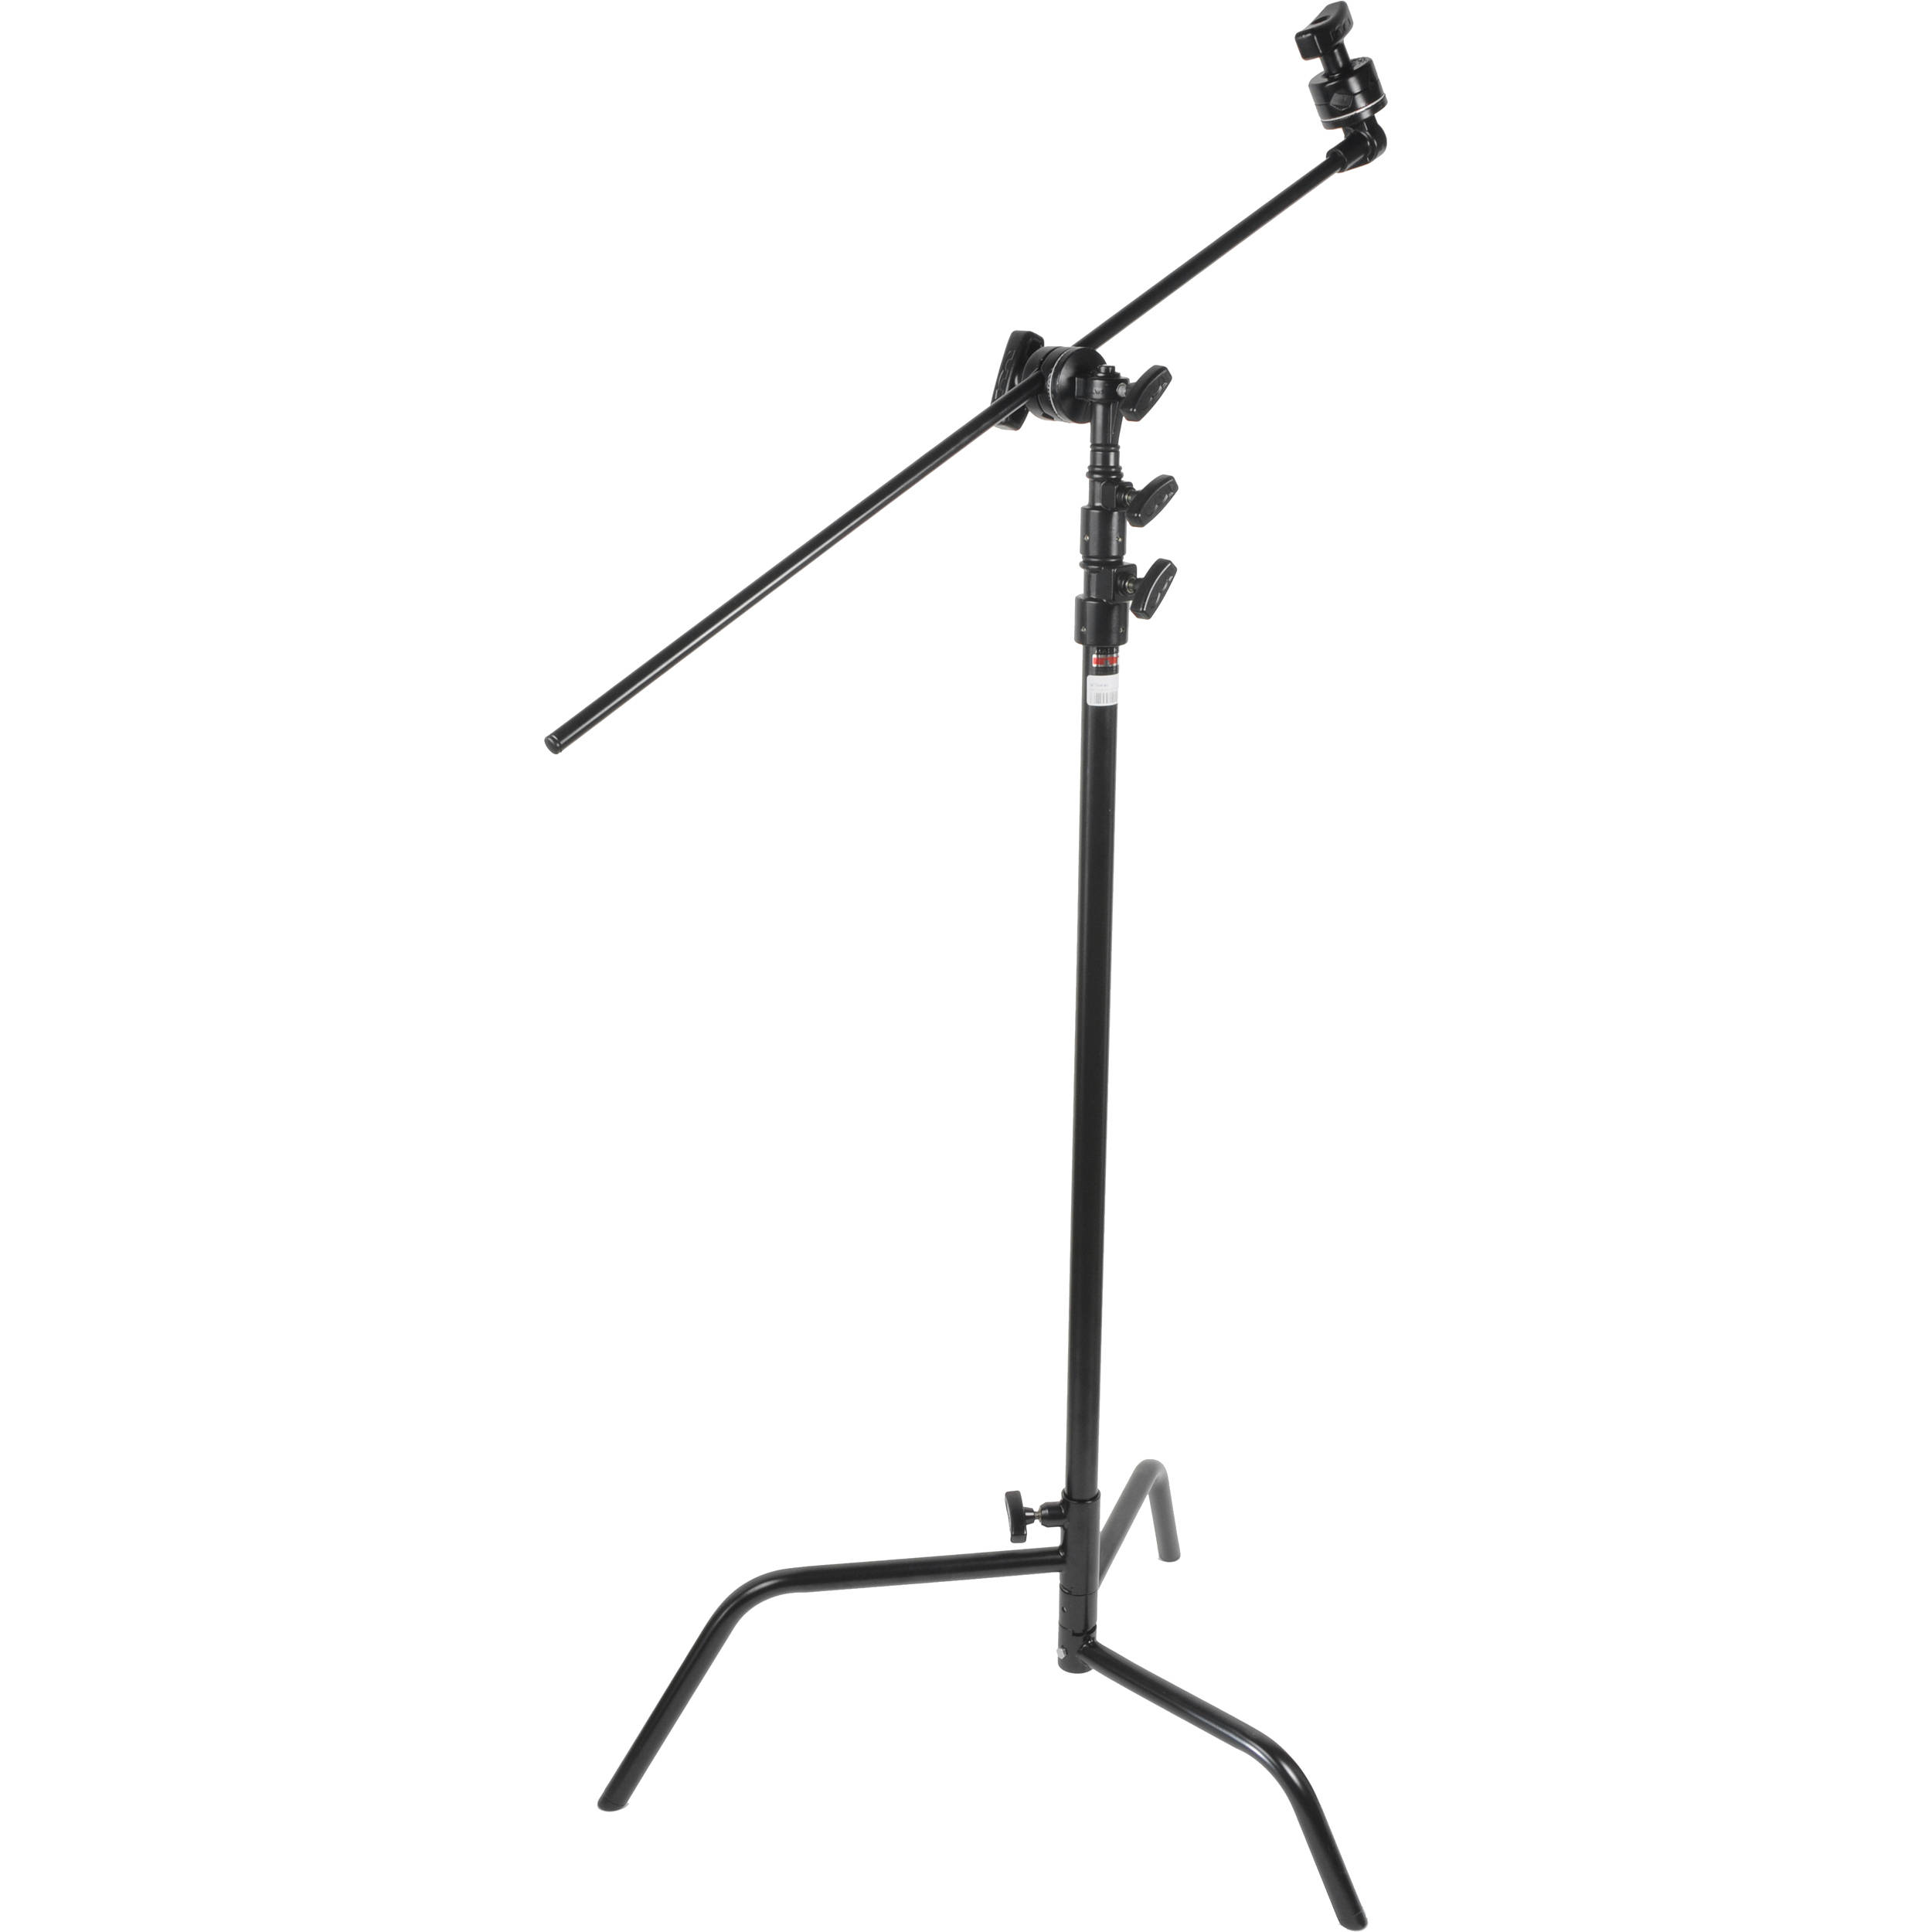 161cm Robust Stainless-Steel Turtle-Based Studio C-Stand with 20